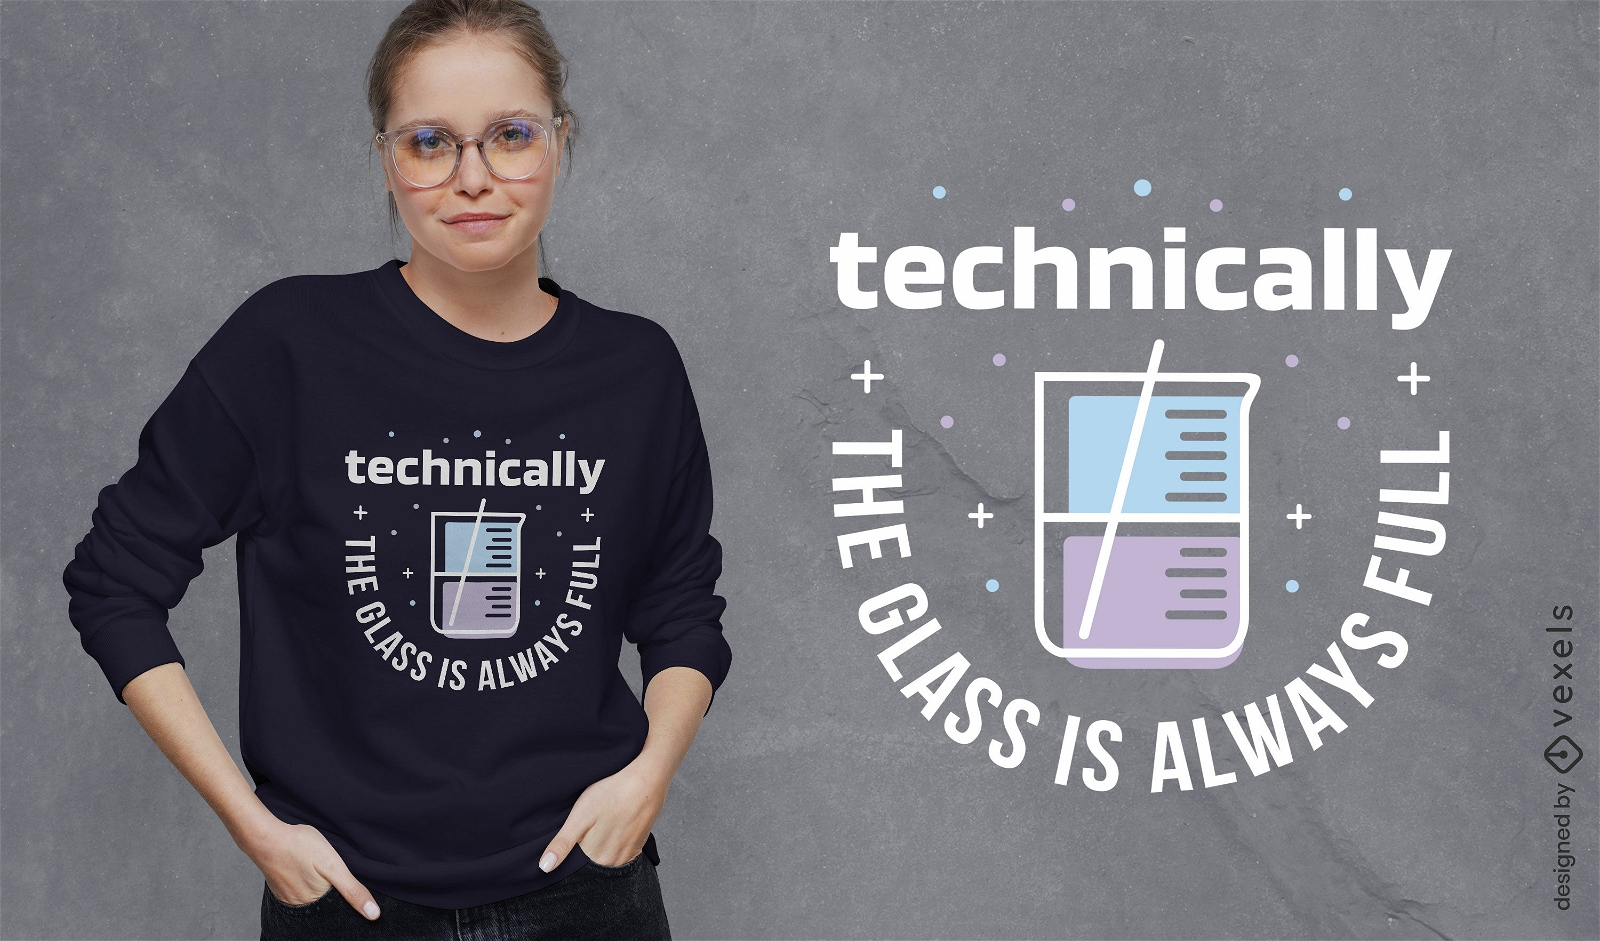 Chemistry experiment science t-shirt design